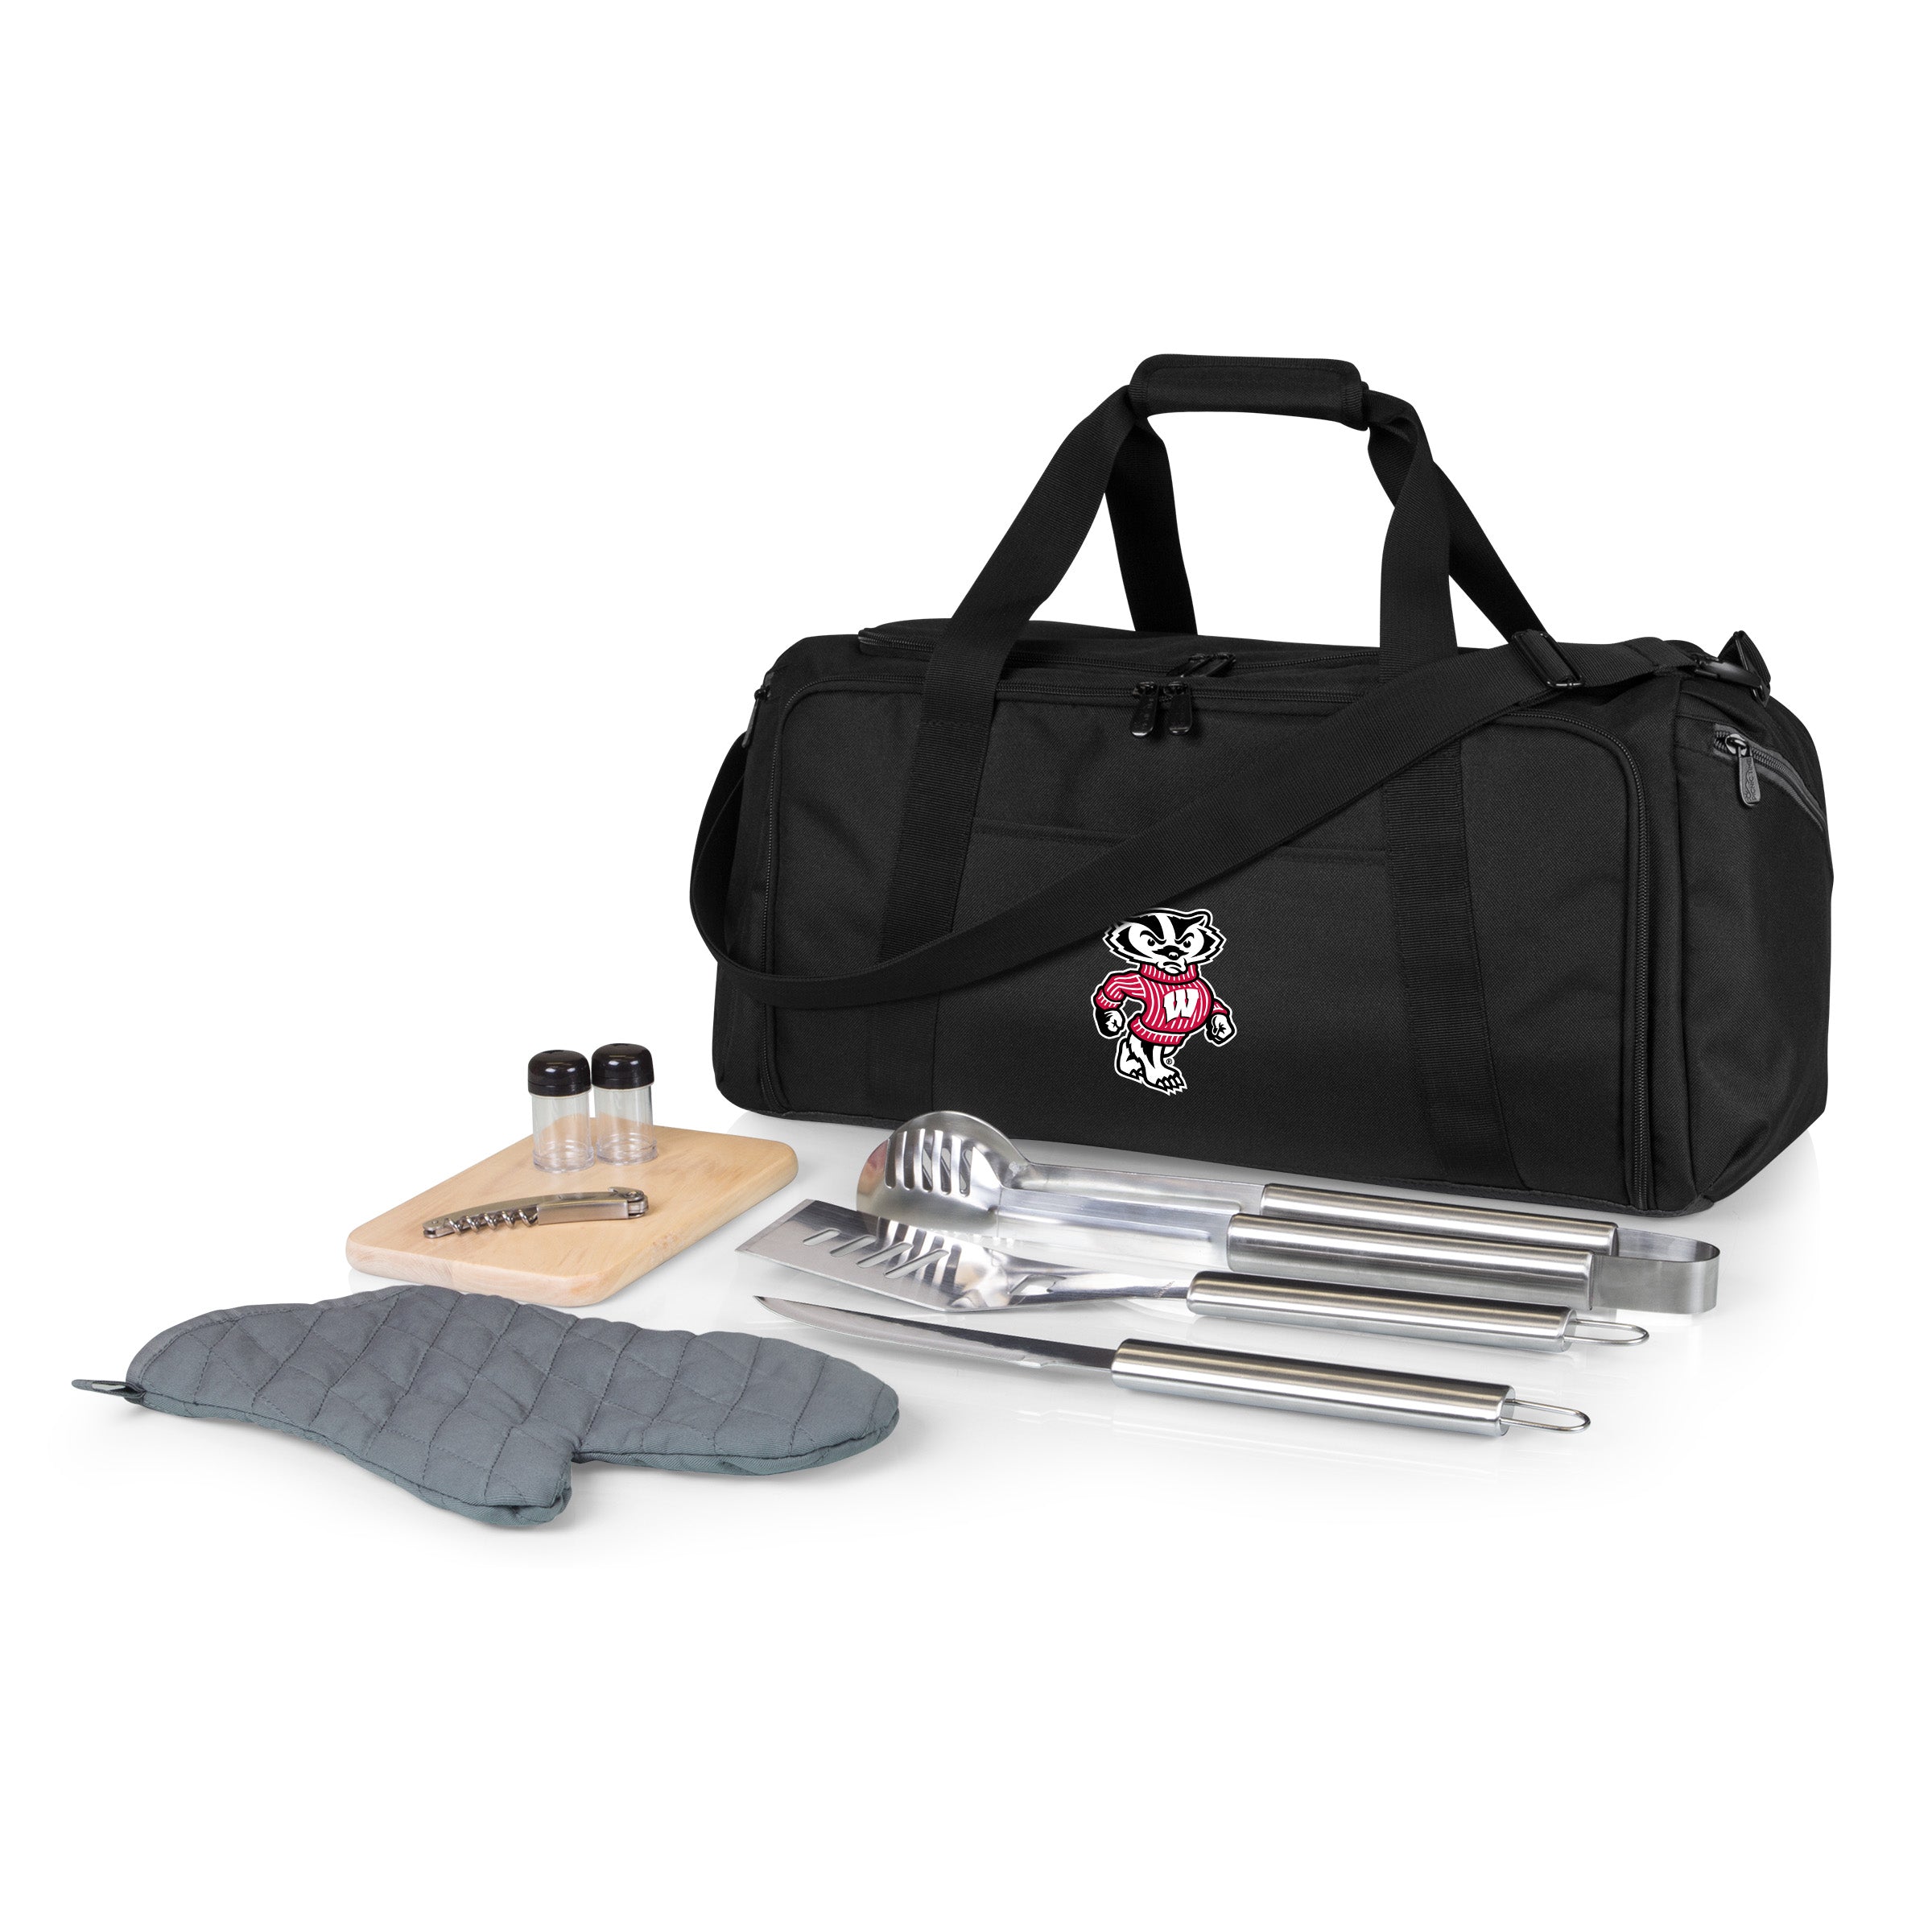 Wisconsin Badgers - BBQ Kit Grill Set & Cooler